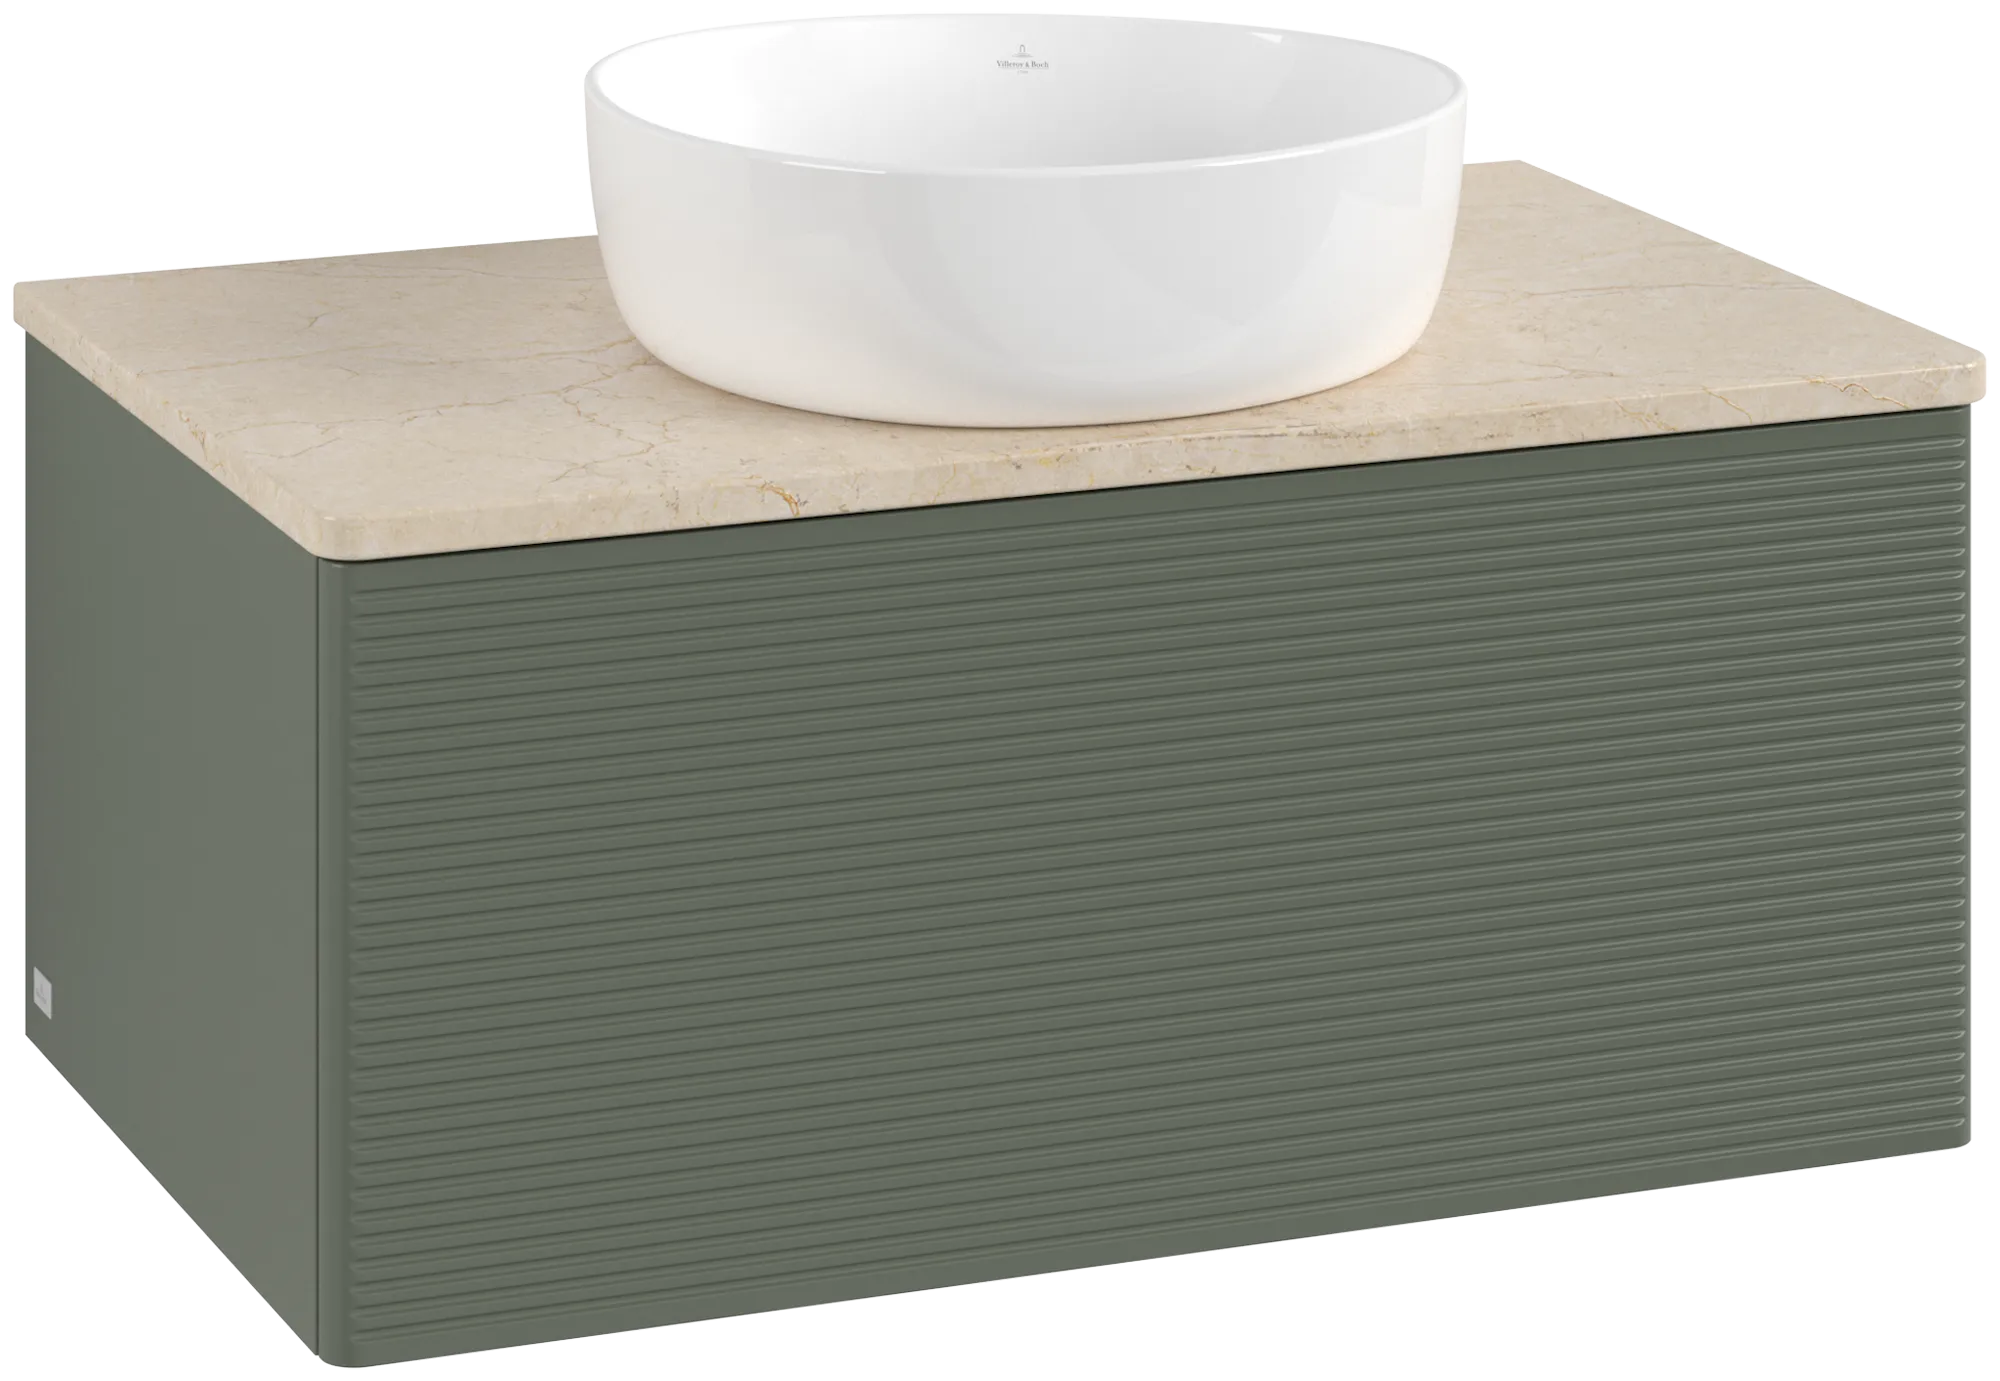 Obrázek VILLEROY BOCH Antao Vanity unit, 1 pull-out compartment, 800 x 360 x 500 mm, Front with grain texture, Leaf Green Matt Lacquer / Botticino #K30113HL